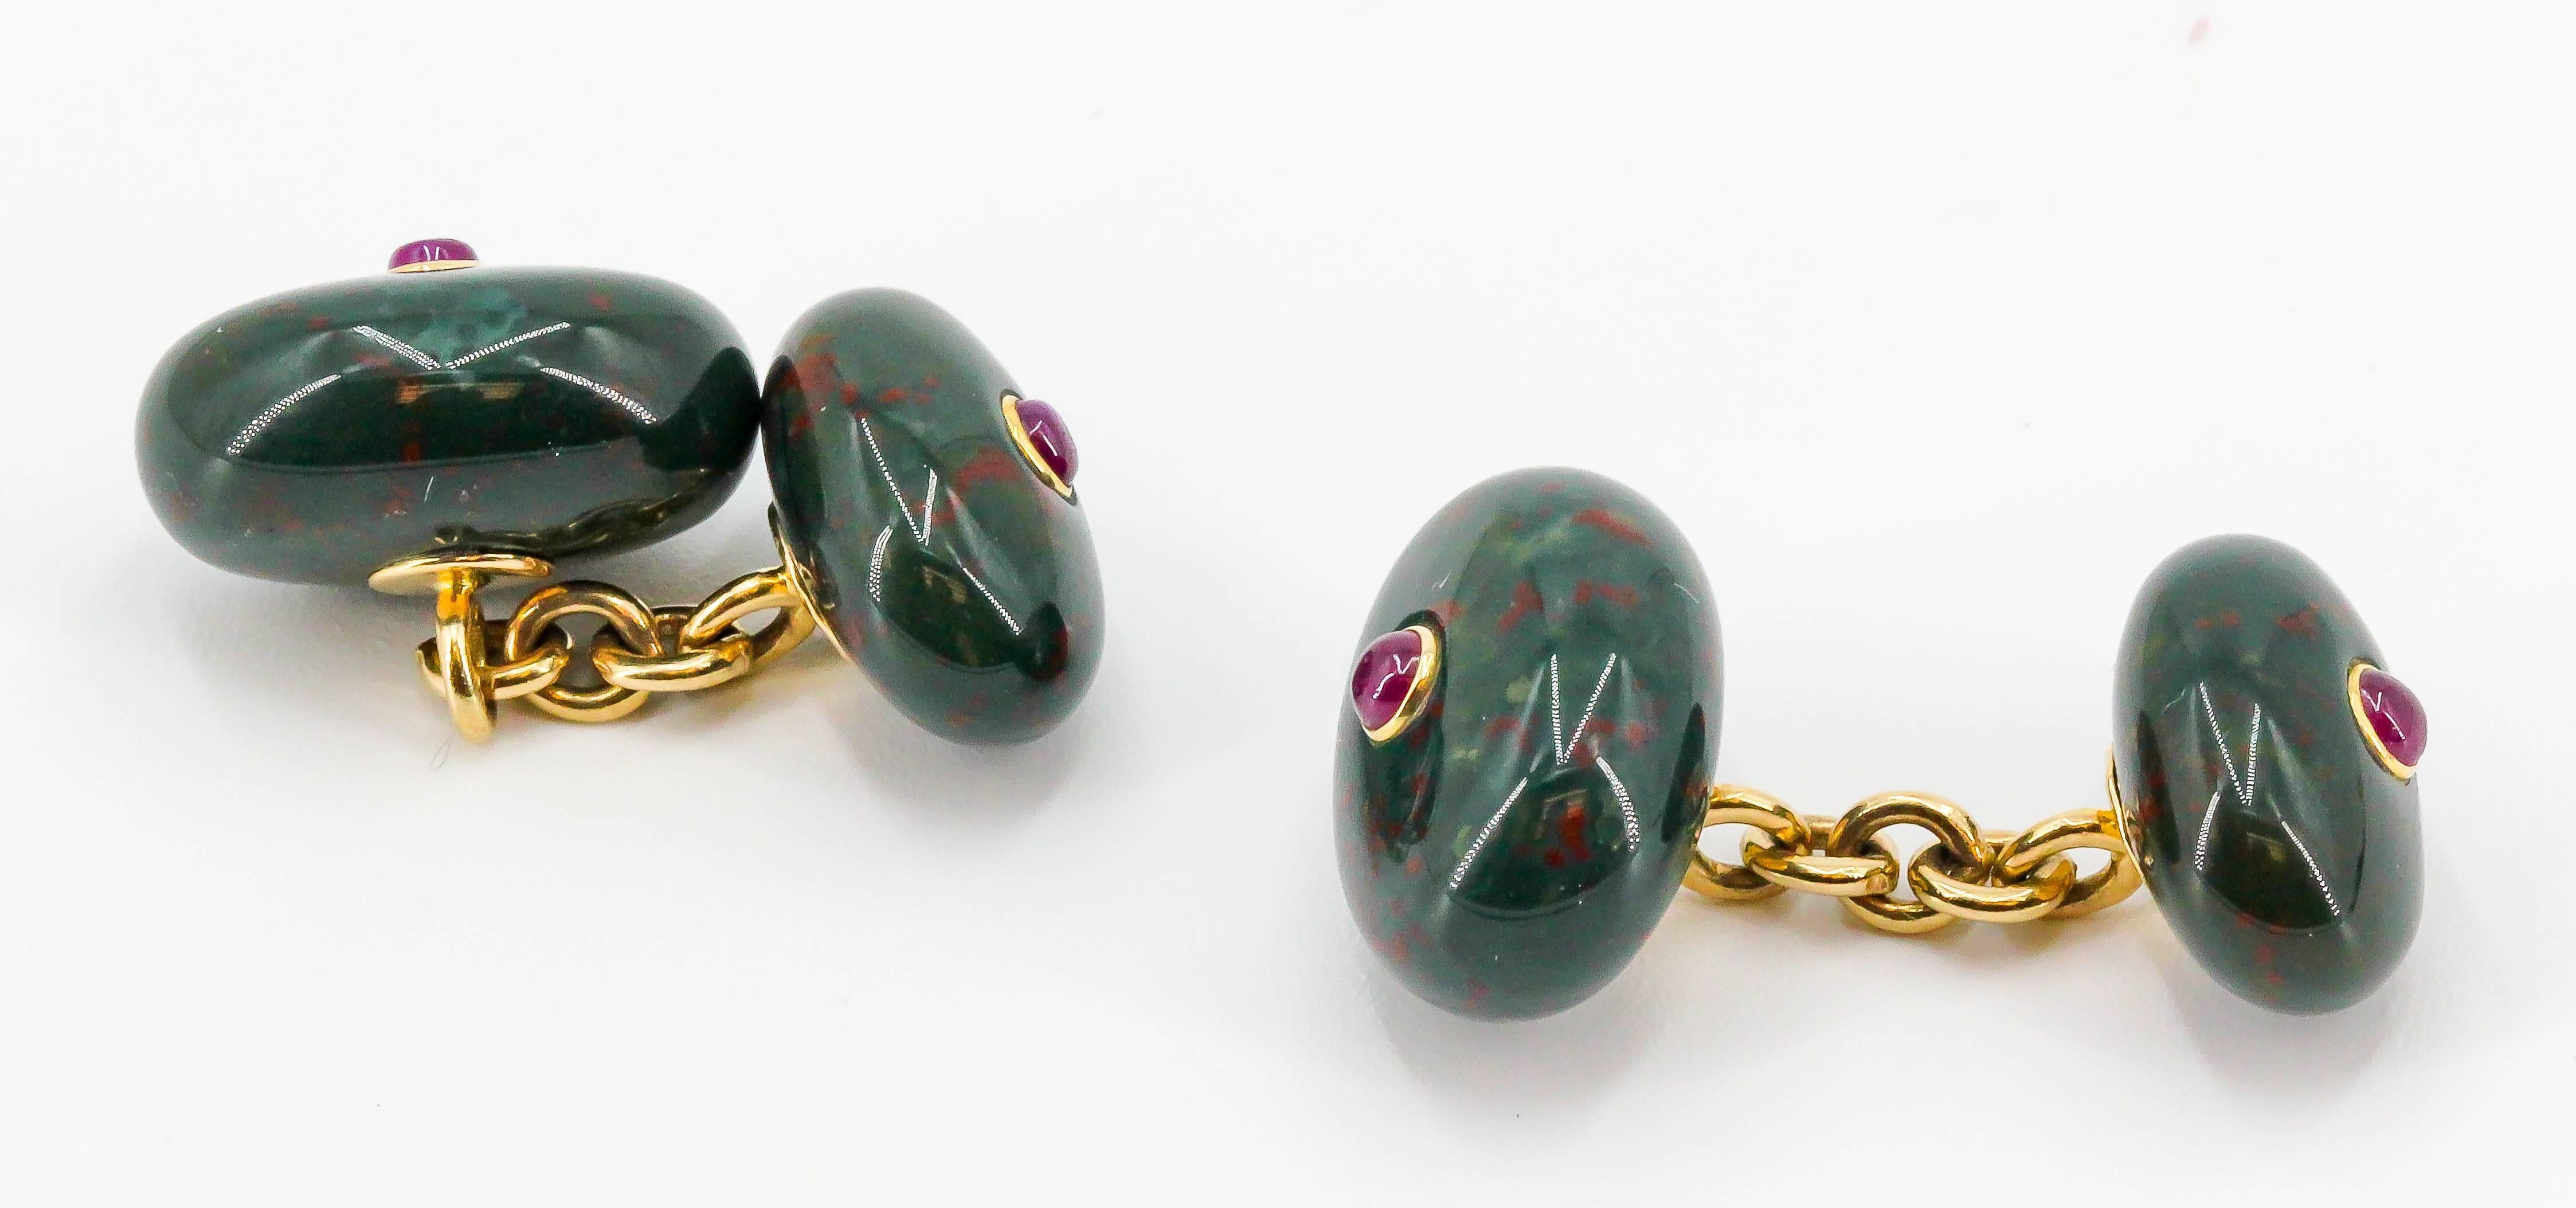 Handsome bloodstone, cabochon ruby and 14k yellow gold cufflinks. They feature rich red cabochon rubies over an oval bloodstone at each end.

Hallmarks: 14k